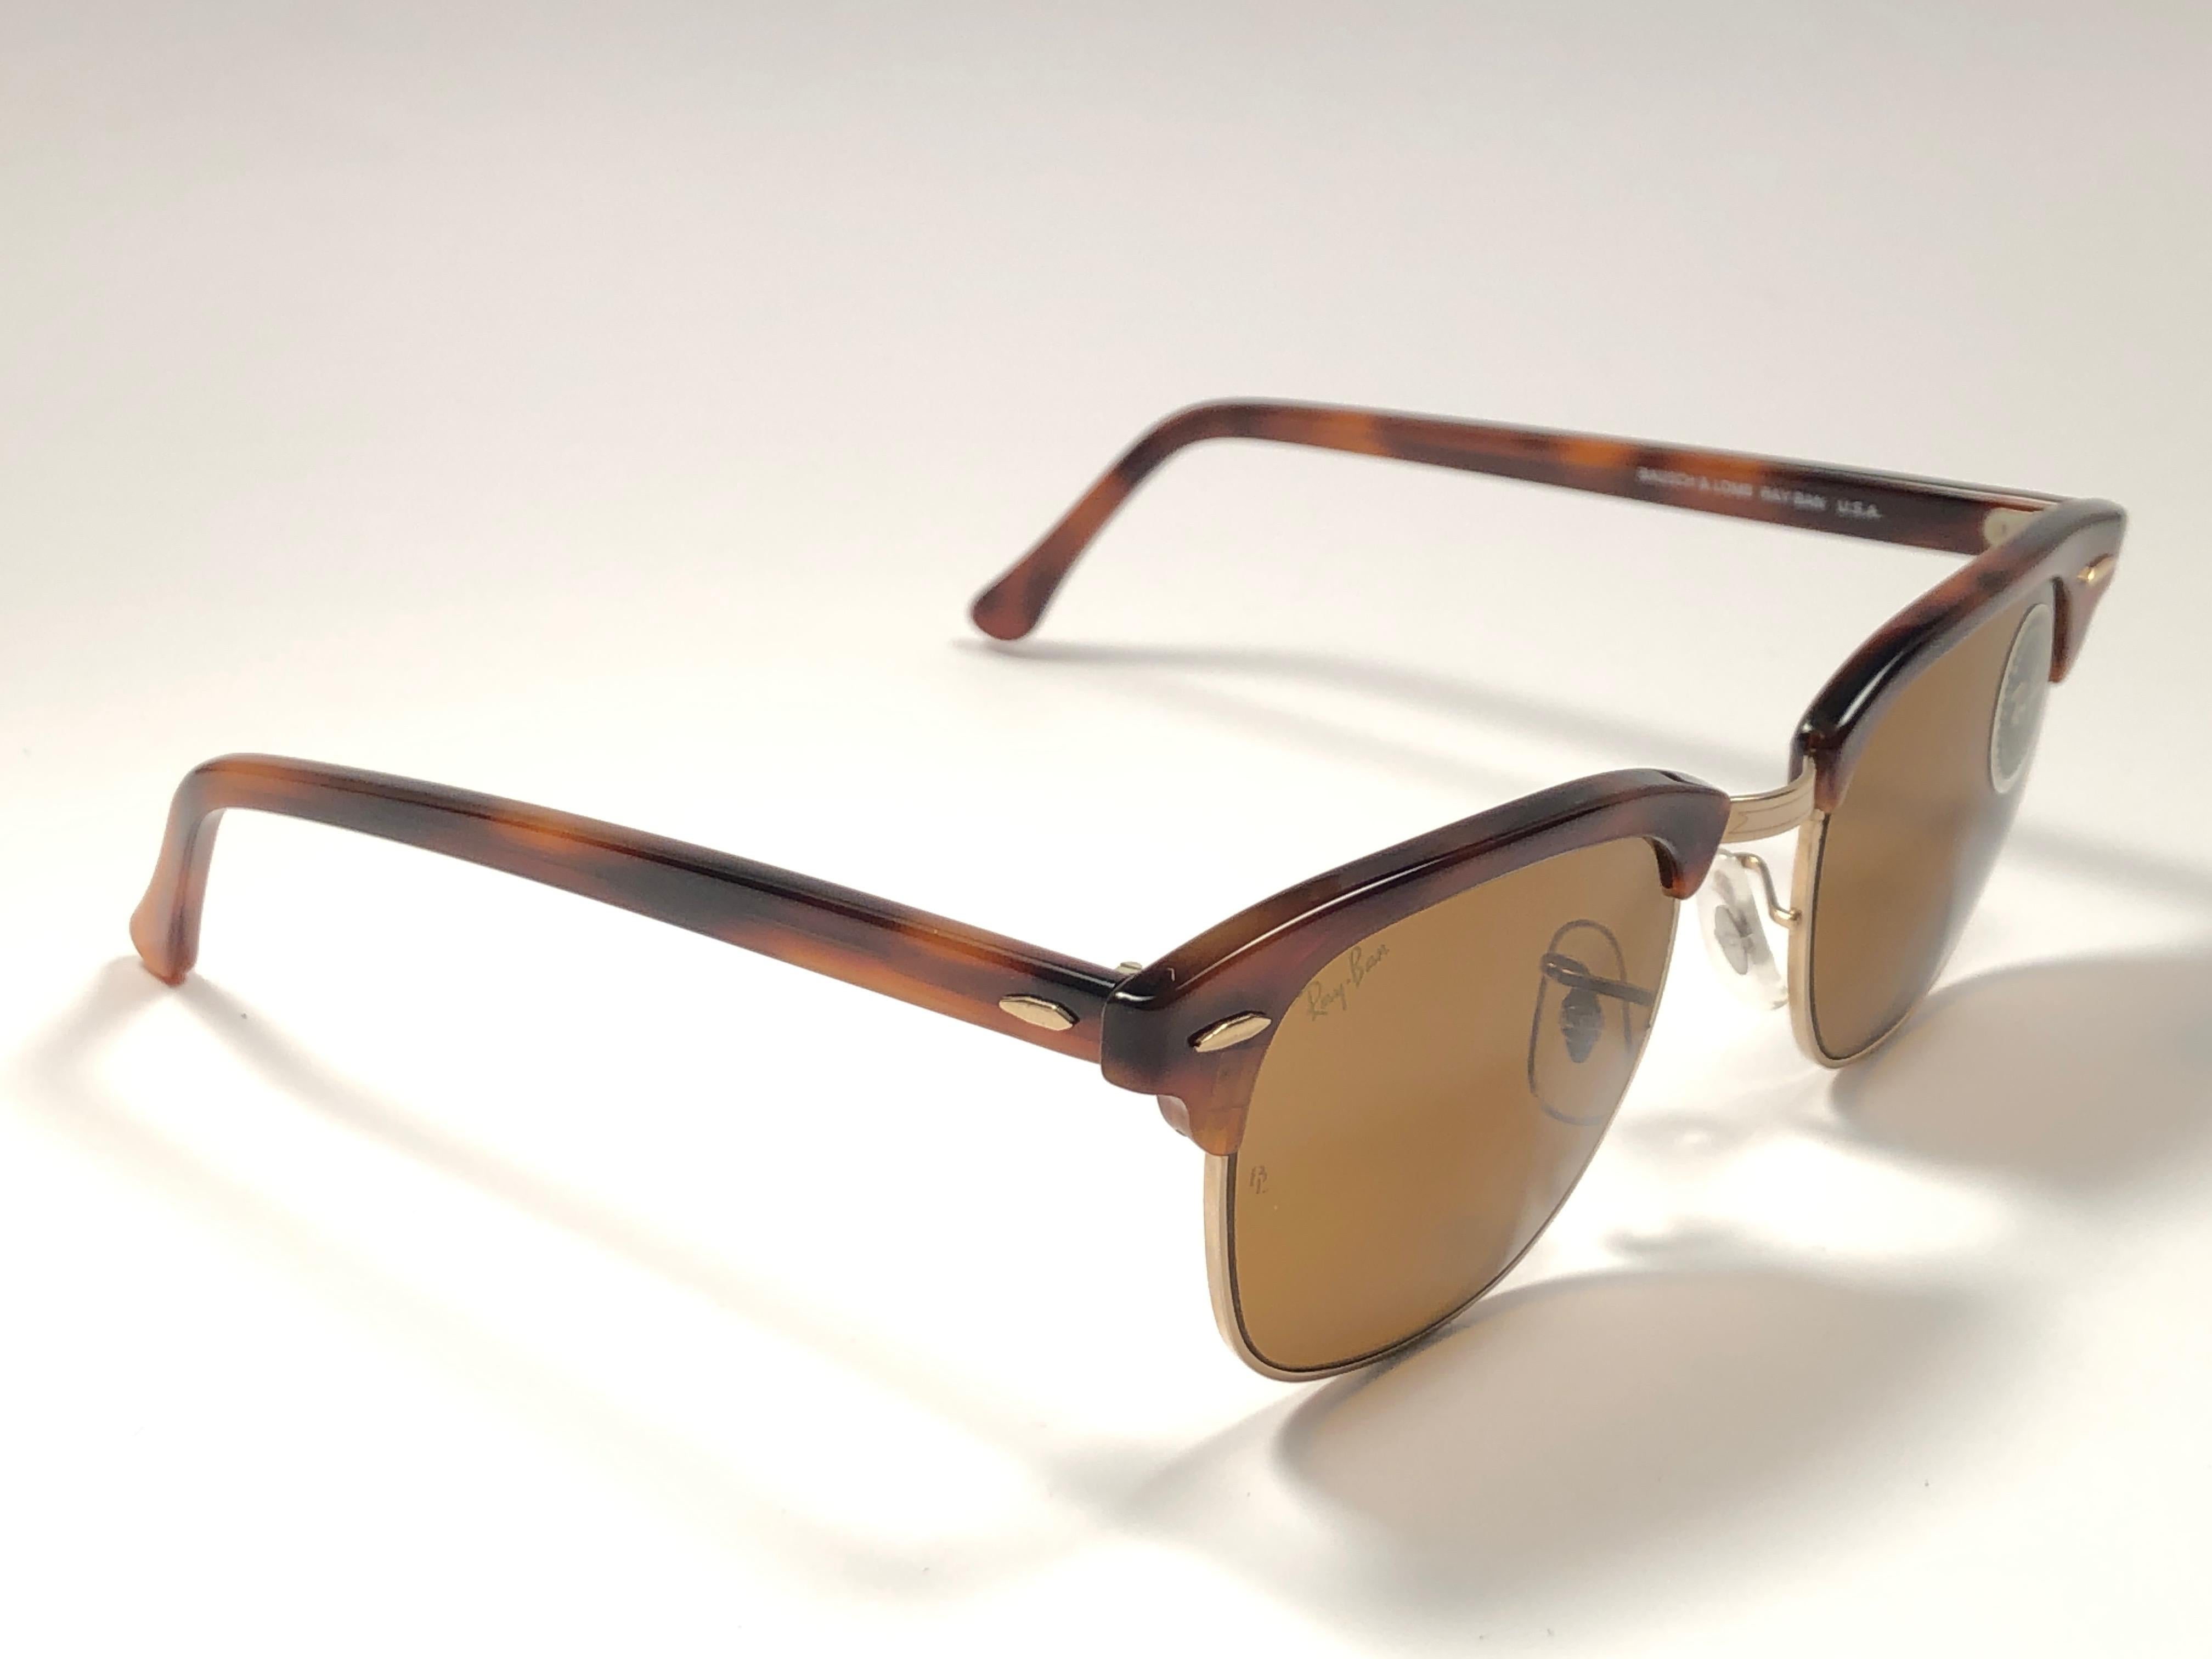 New classic Clubmaster in tortoise and gold. B&L etched in both B15 brown lenses. Please notice that this item is nearly 40 years old and could show some storage wear.  
New, ever worn or displayed.